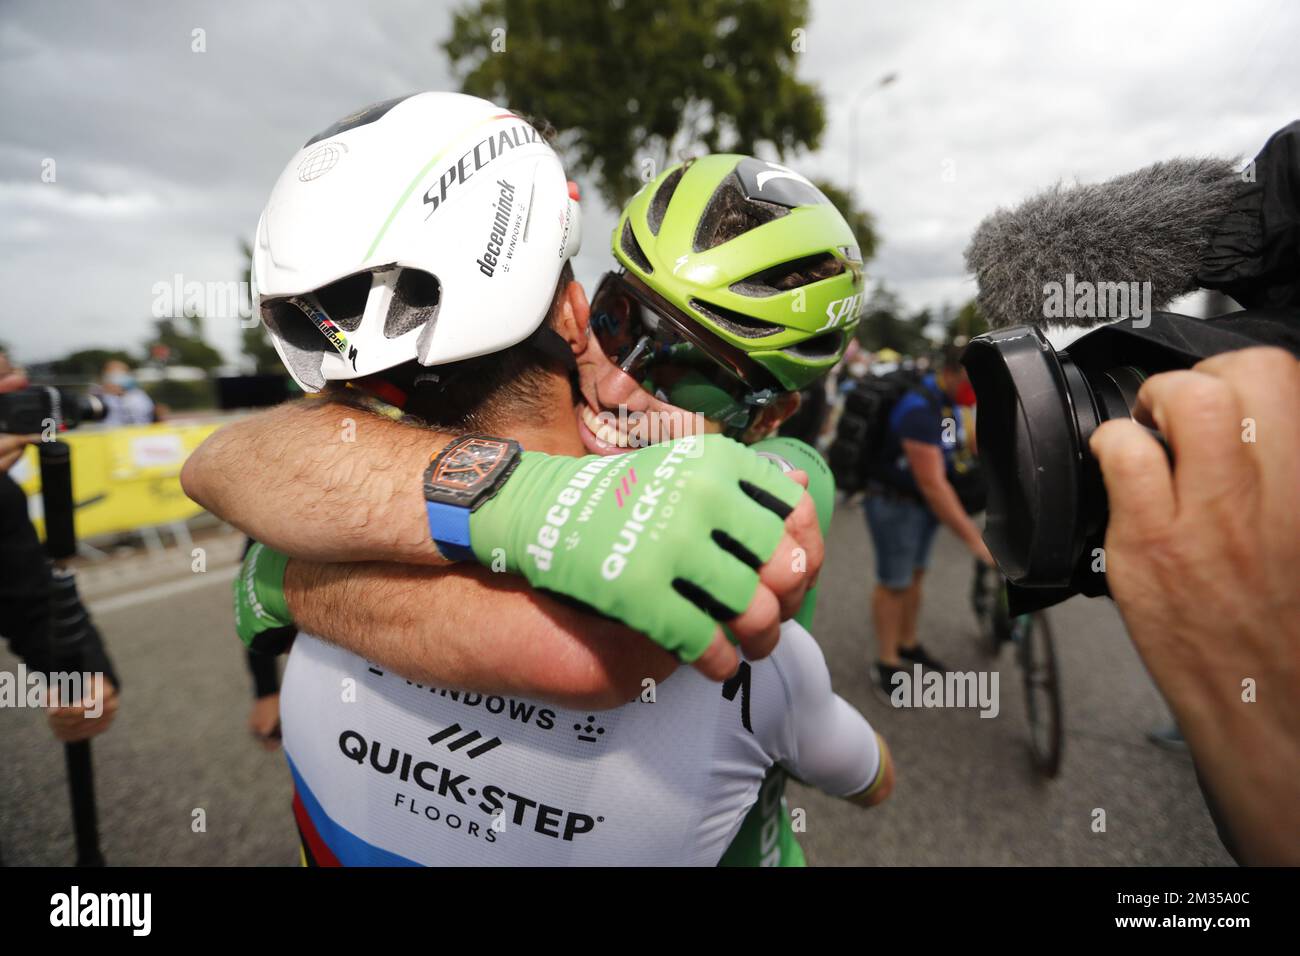 British Mark Cavendish of Deceuninck - Quick-Step celebrates with French Julian Alaphilippe of Deceuninck - Quick-Step after winning stage 10 of the 108th edition of the Tour de France cycling race, 190,7 km from Albertville to Valence, France, Tuesday 06 July 2021. This year's Tour de France takes place from 26 June to 18 July 2021. BELGA PHOTO POOL COR VOS  Stock Photo